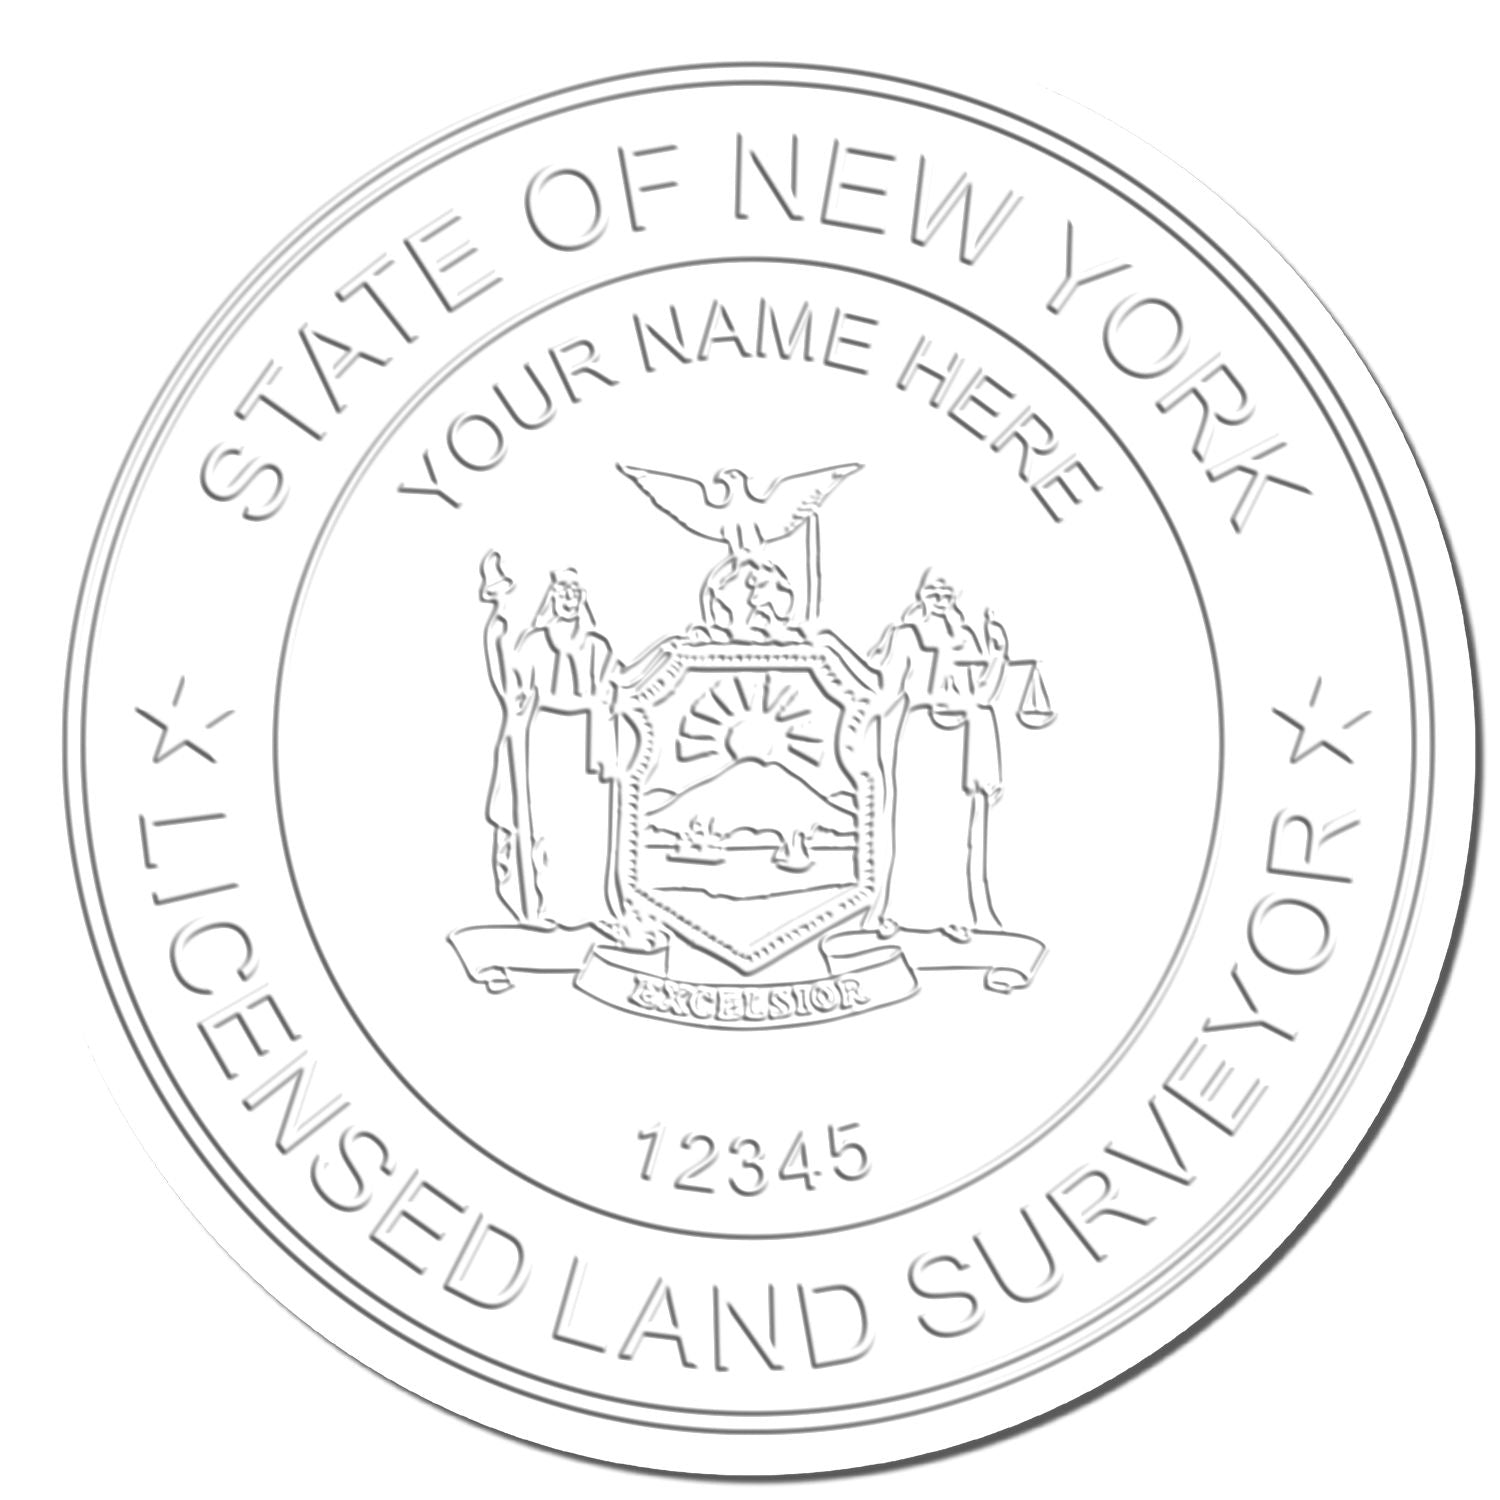 This paper is stamped with a sample imprint of the Long Reach New York Land Surveyor Seal, signifying its quality and reliability.